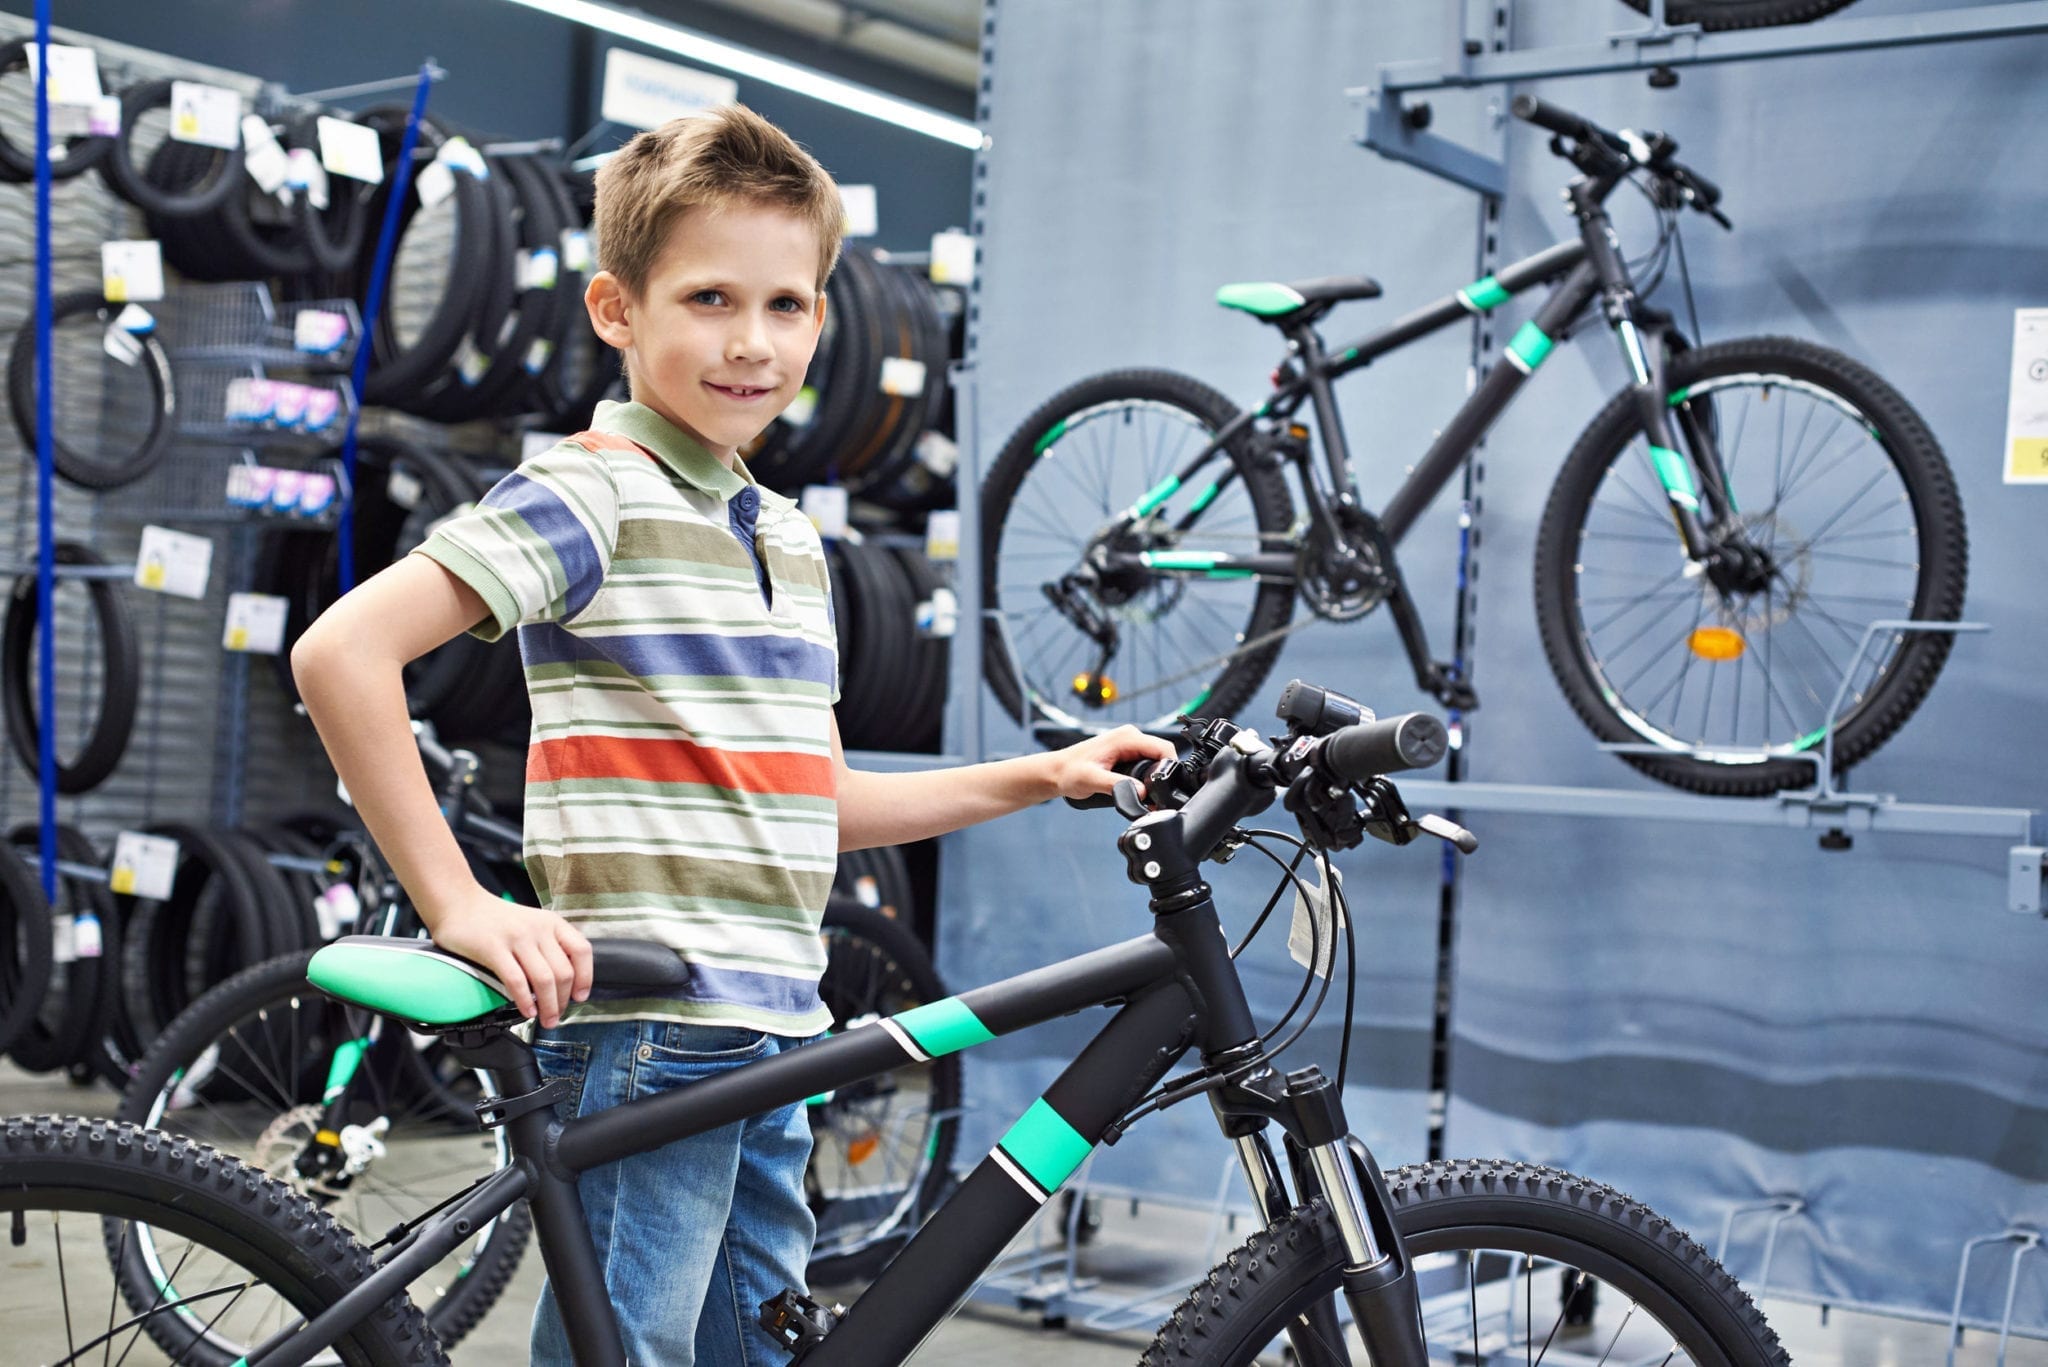 Did Your Child Get a New Bike This Holiday? Watch for Florida Drivers